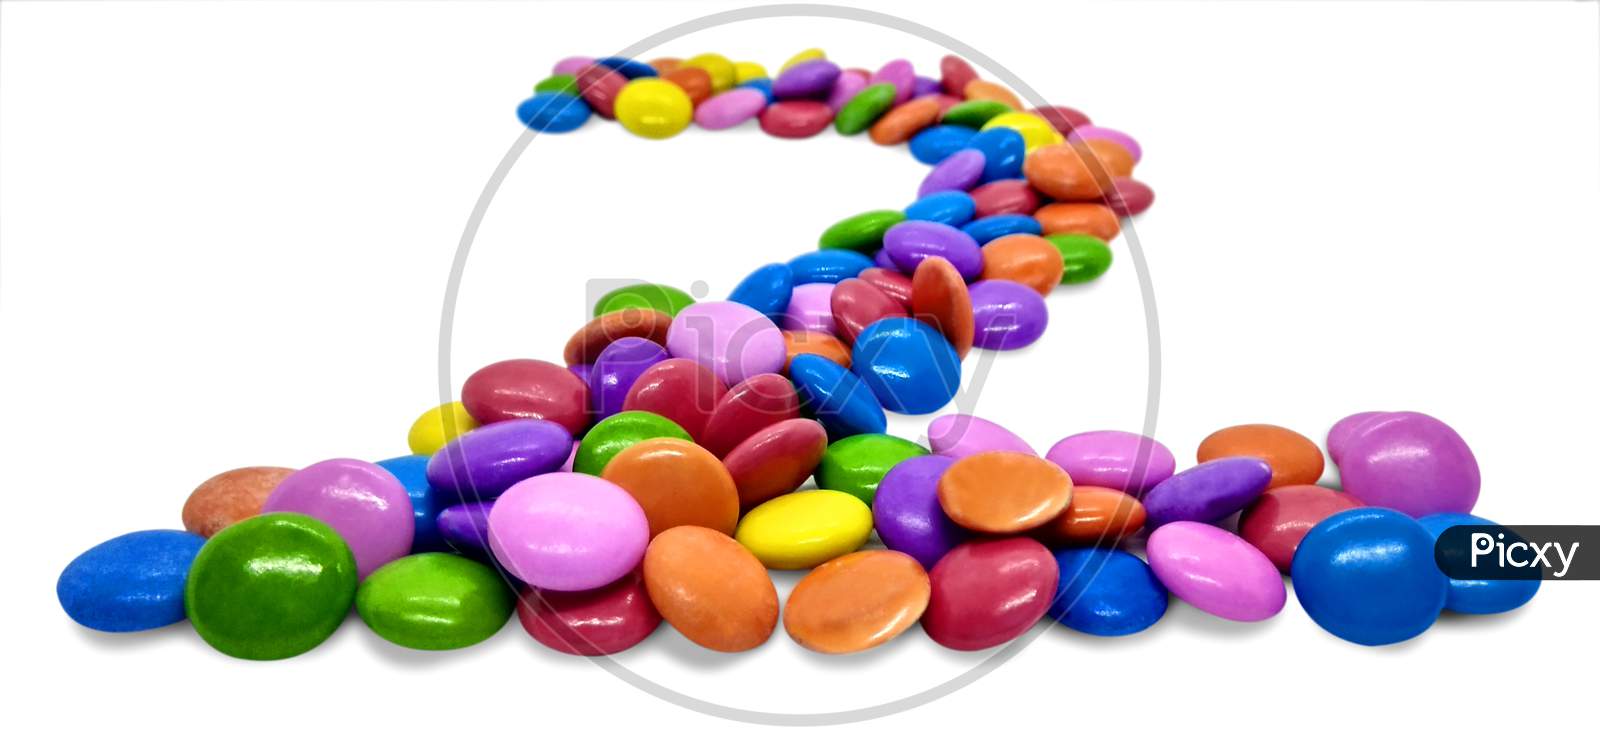 Beautiful Candy Gems on White in the shape of  Numbers, Colored sugar coated fennel seed isolated on white